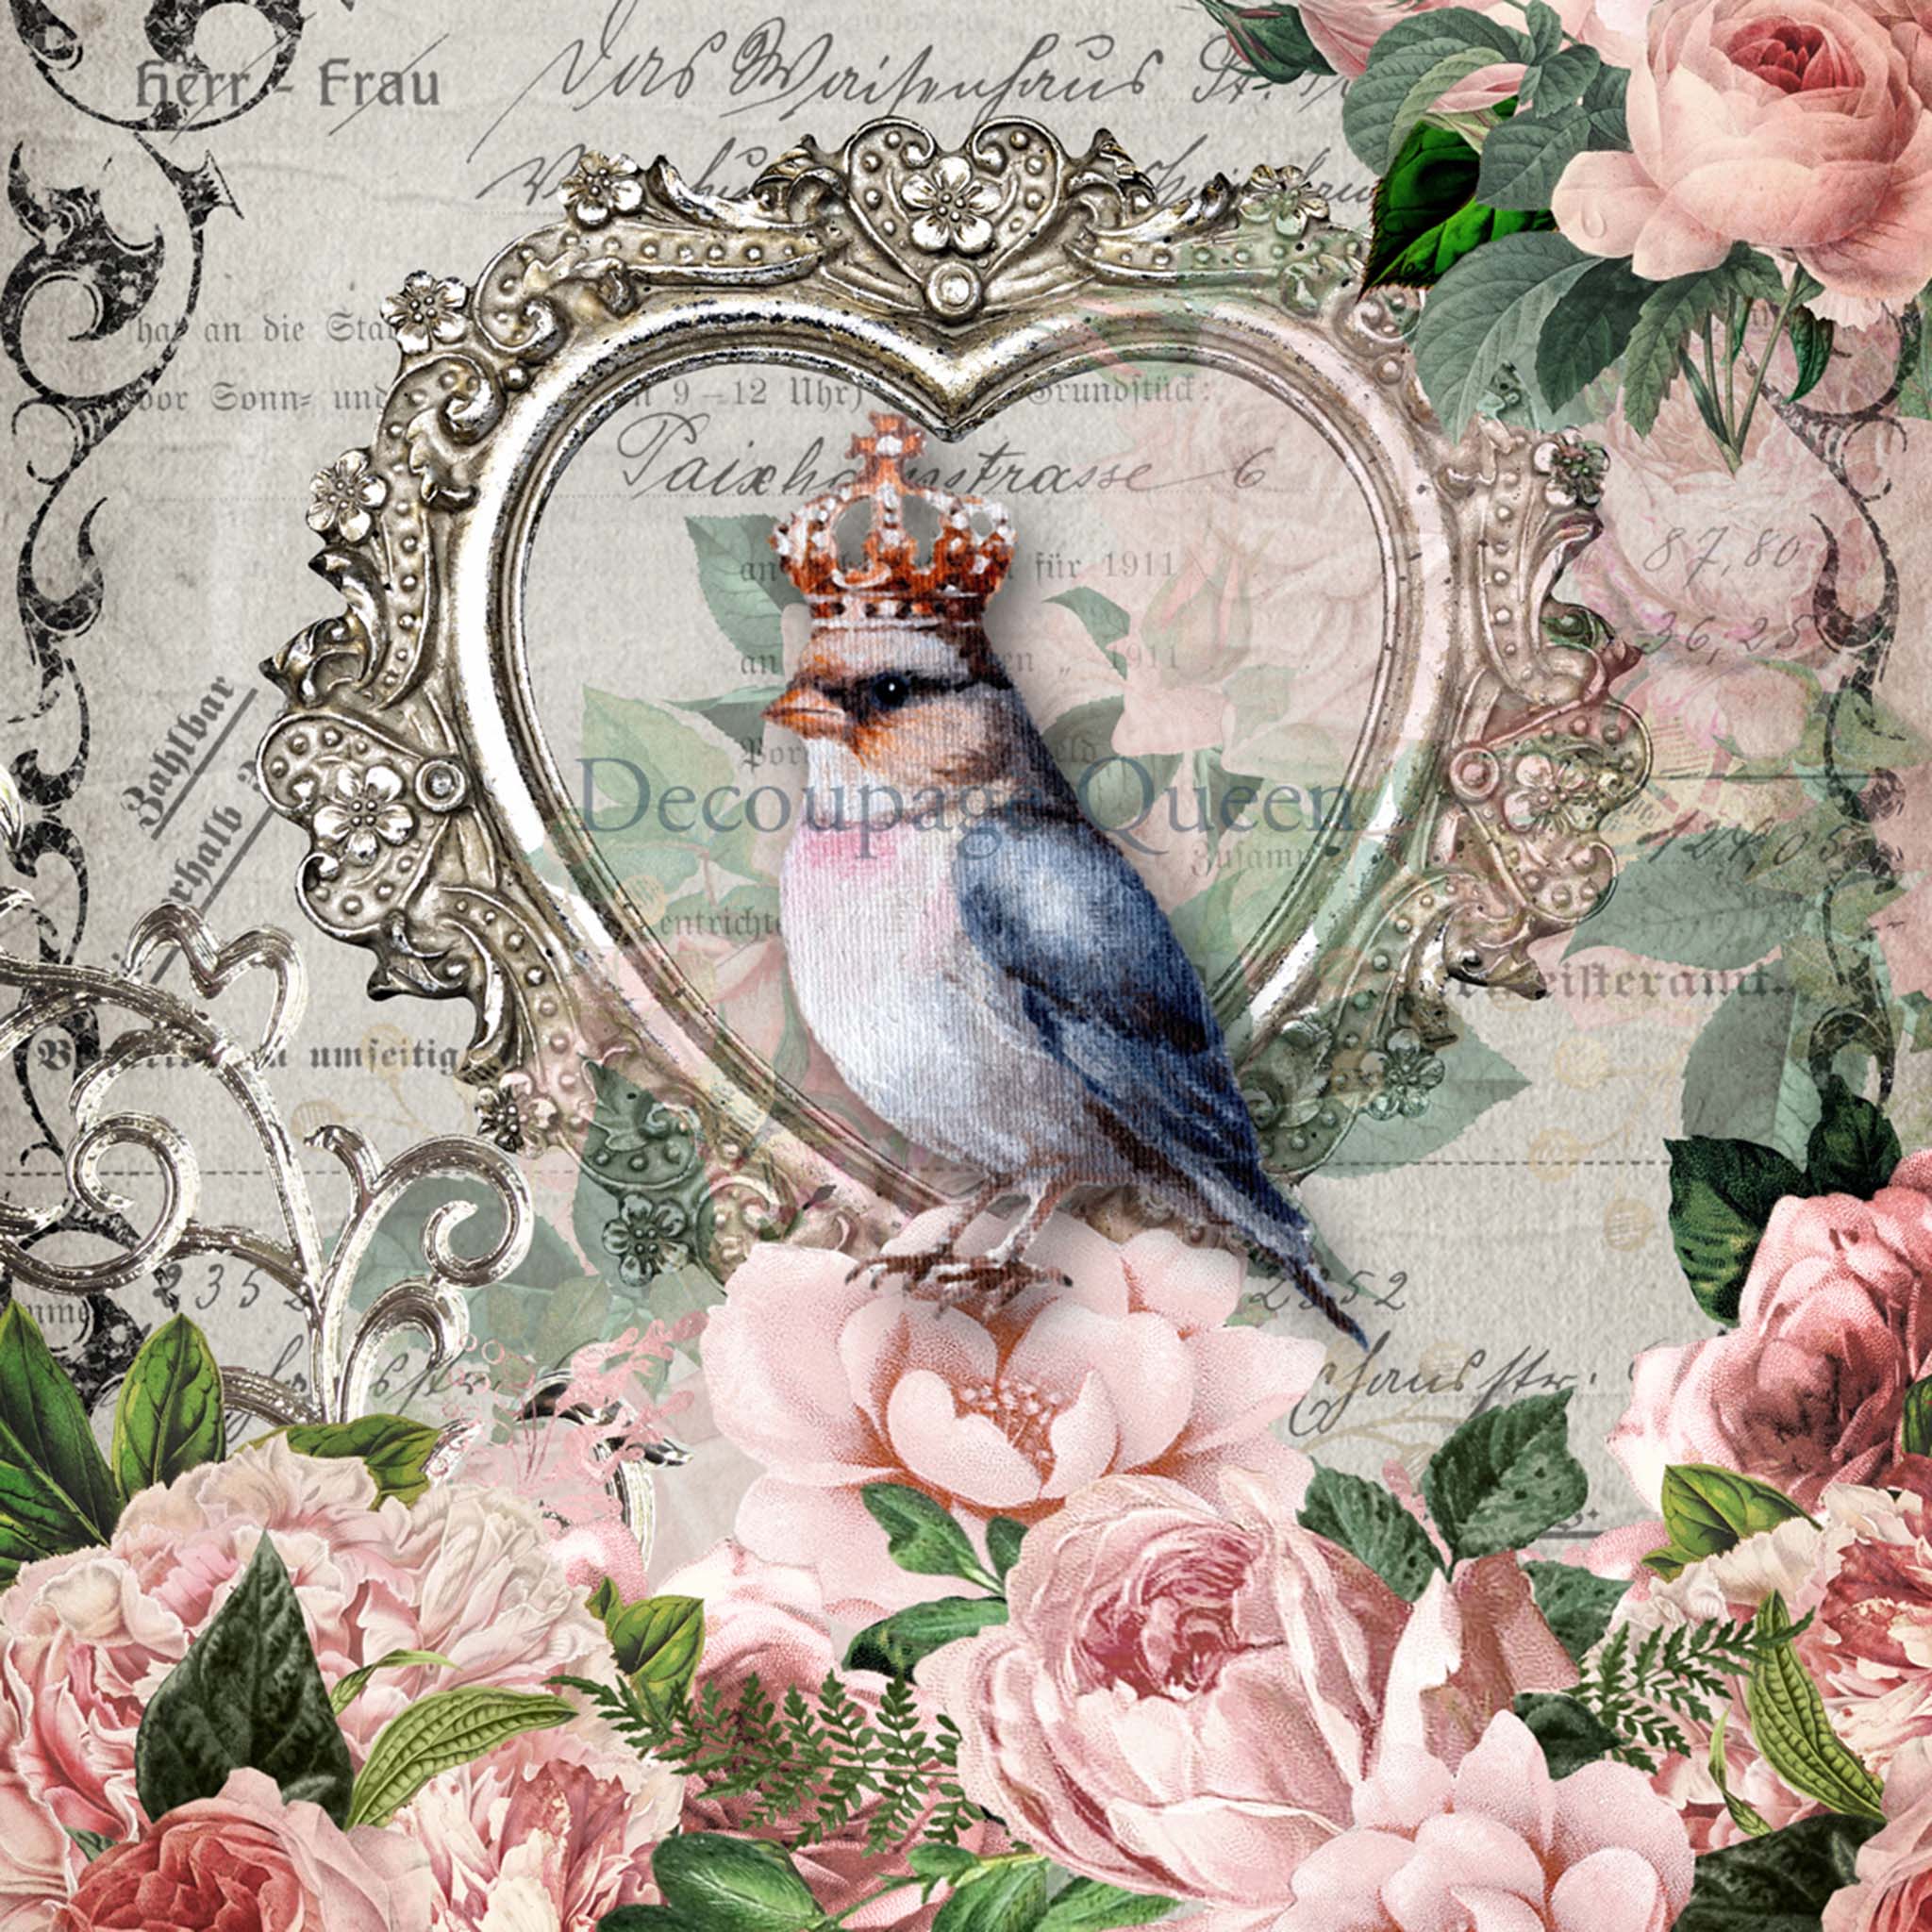 Close-up of an A3 rice paper design that features delicate pink roses, a charming bluebird wearing a crown while sitting in a heart picture frame, and a vintage French document.